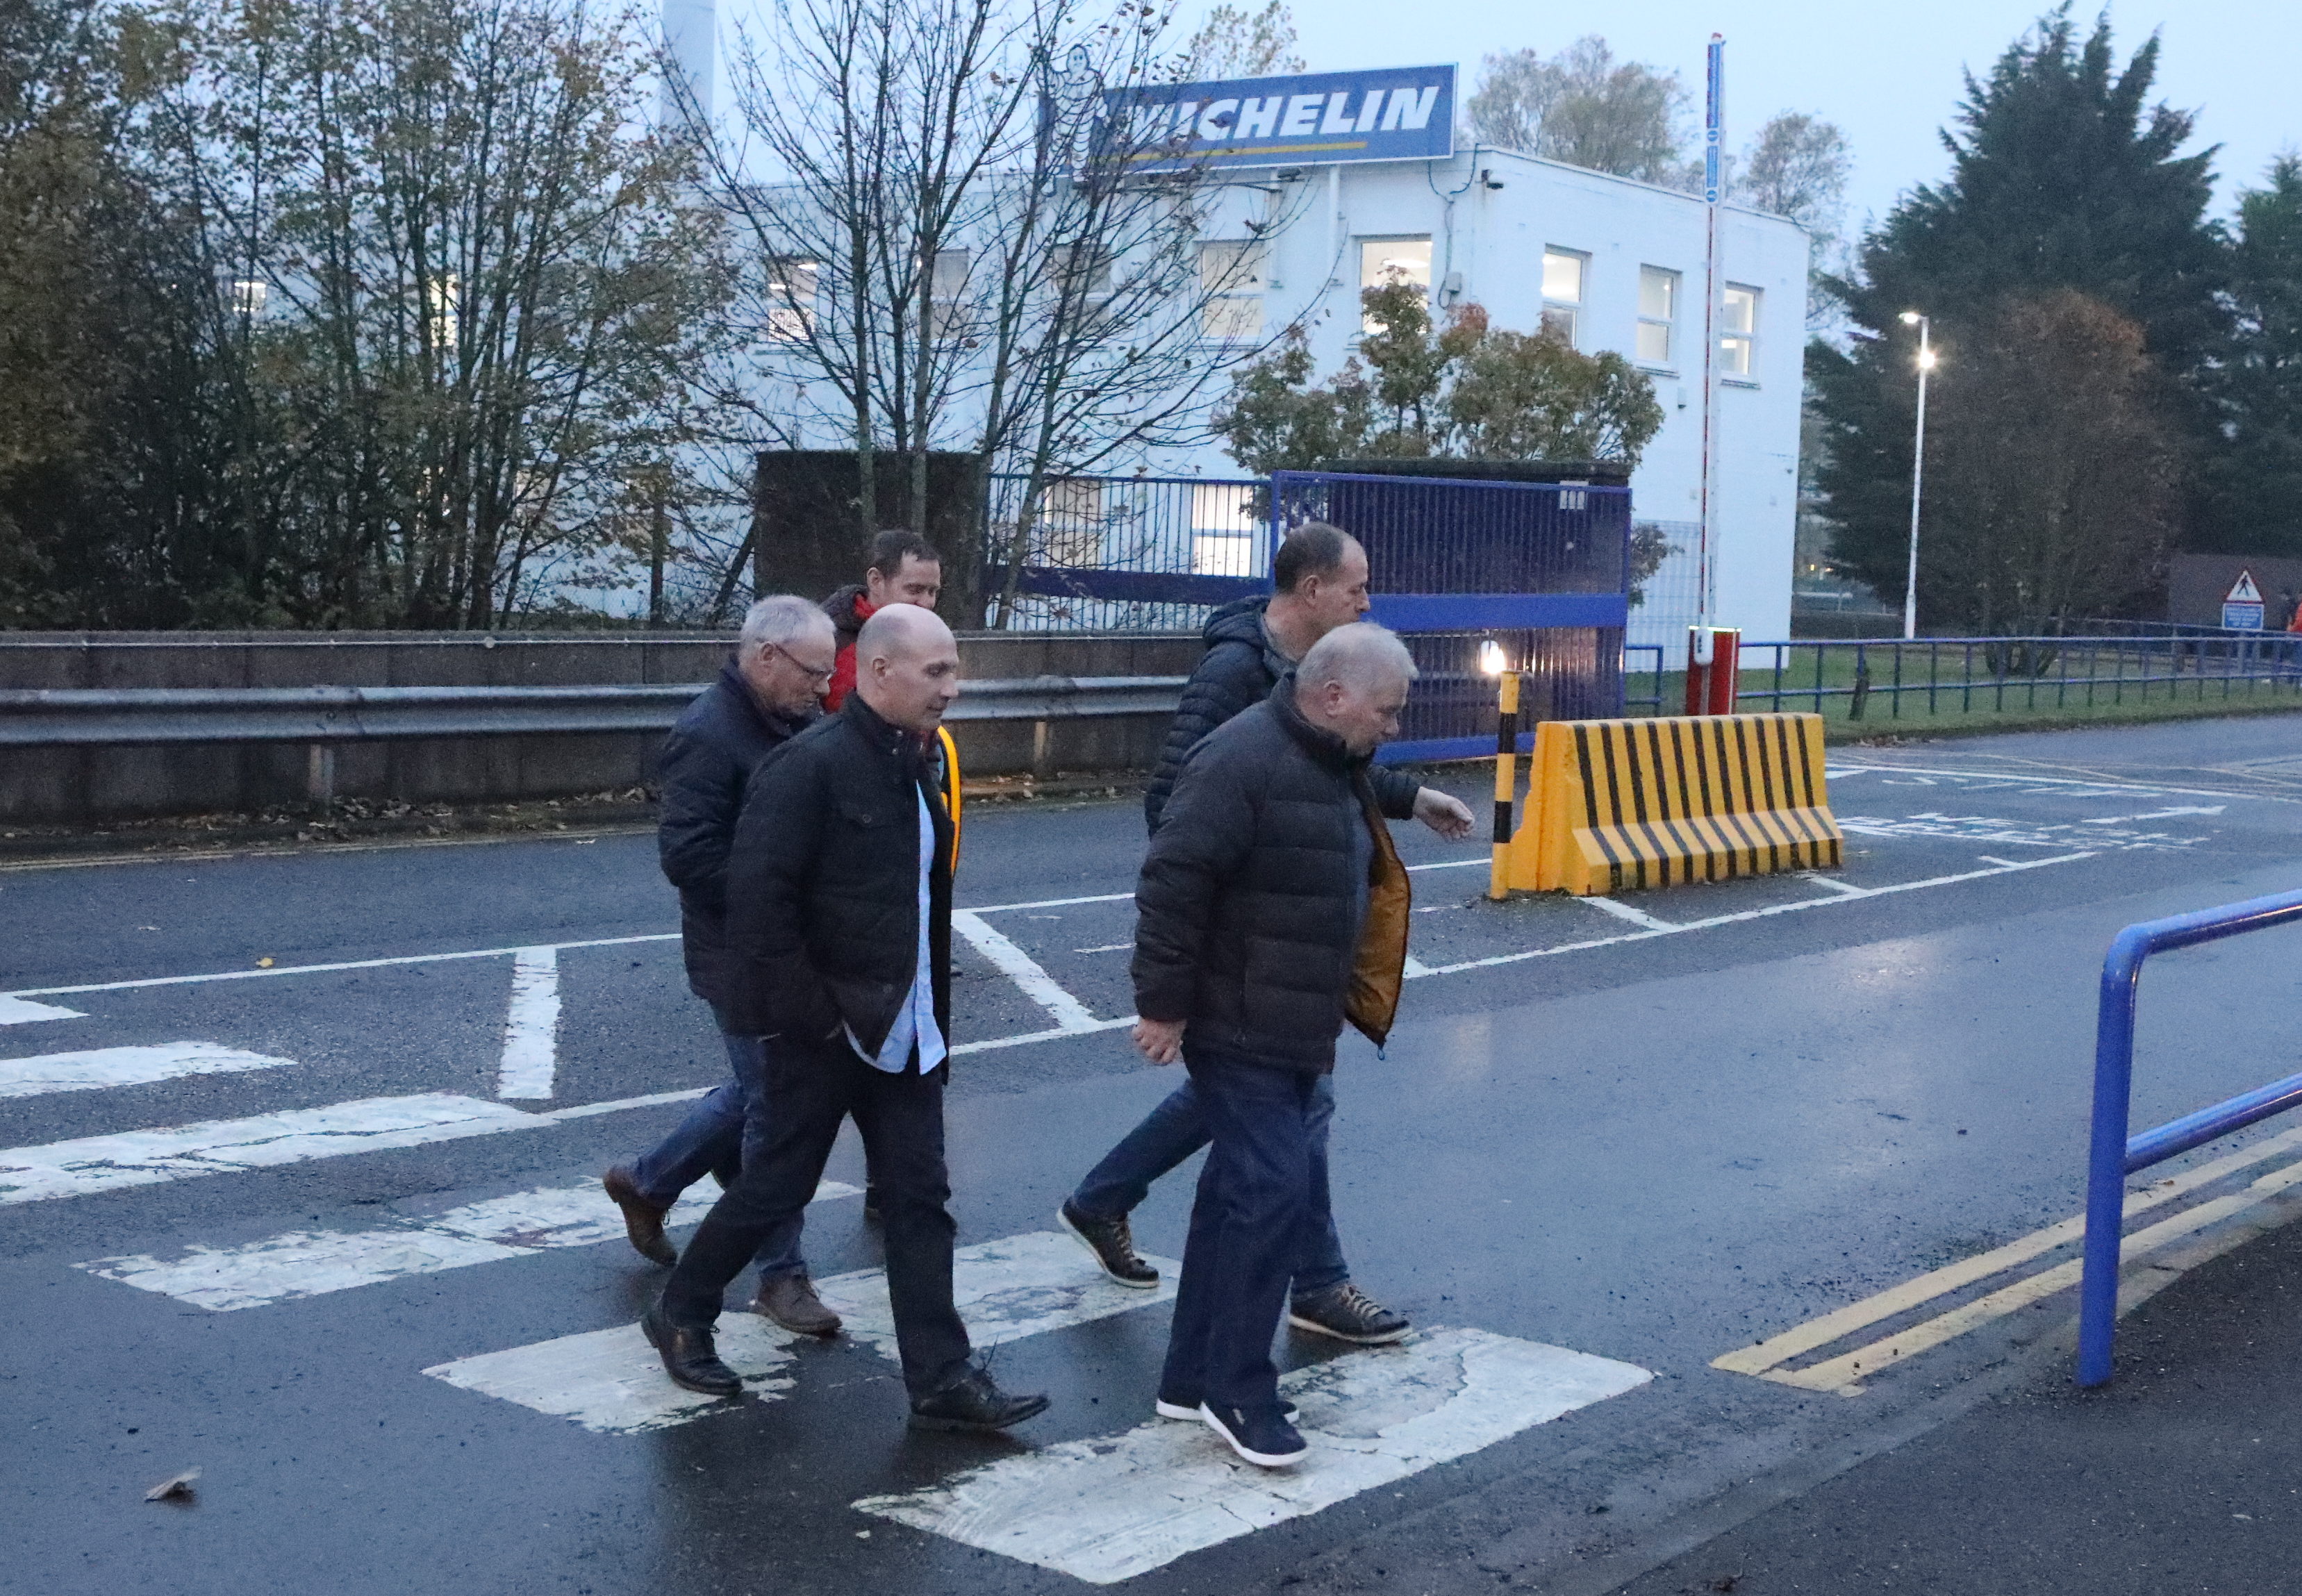 Workers gathered to hear Michelin confirm plans to close its factory in Dundee.